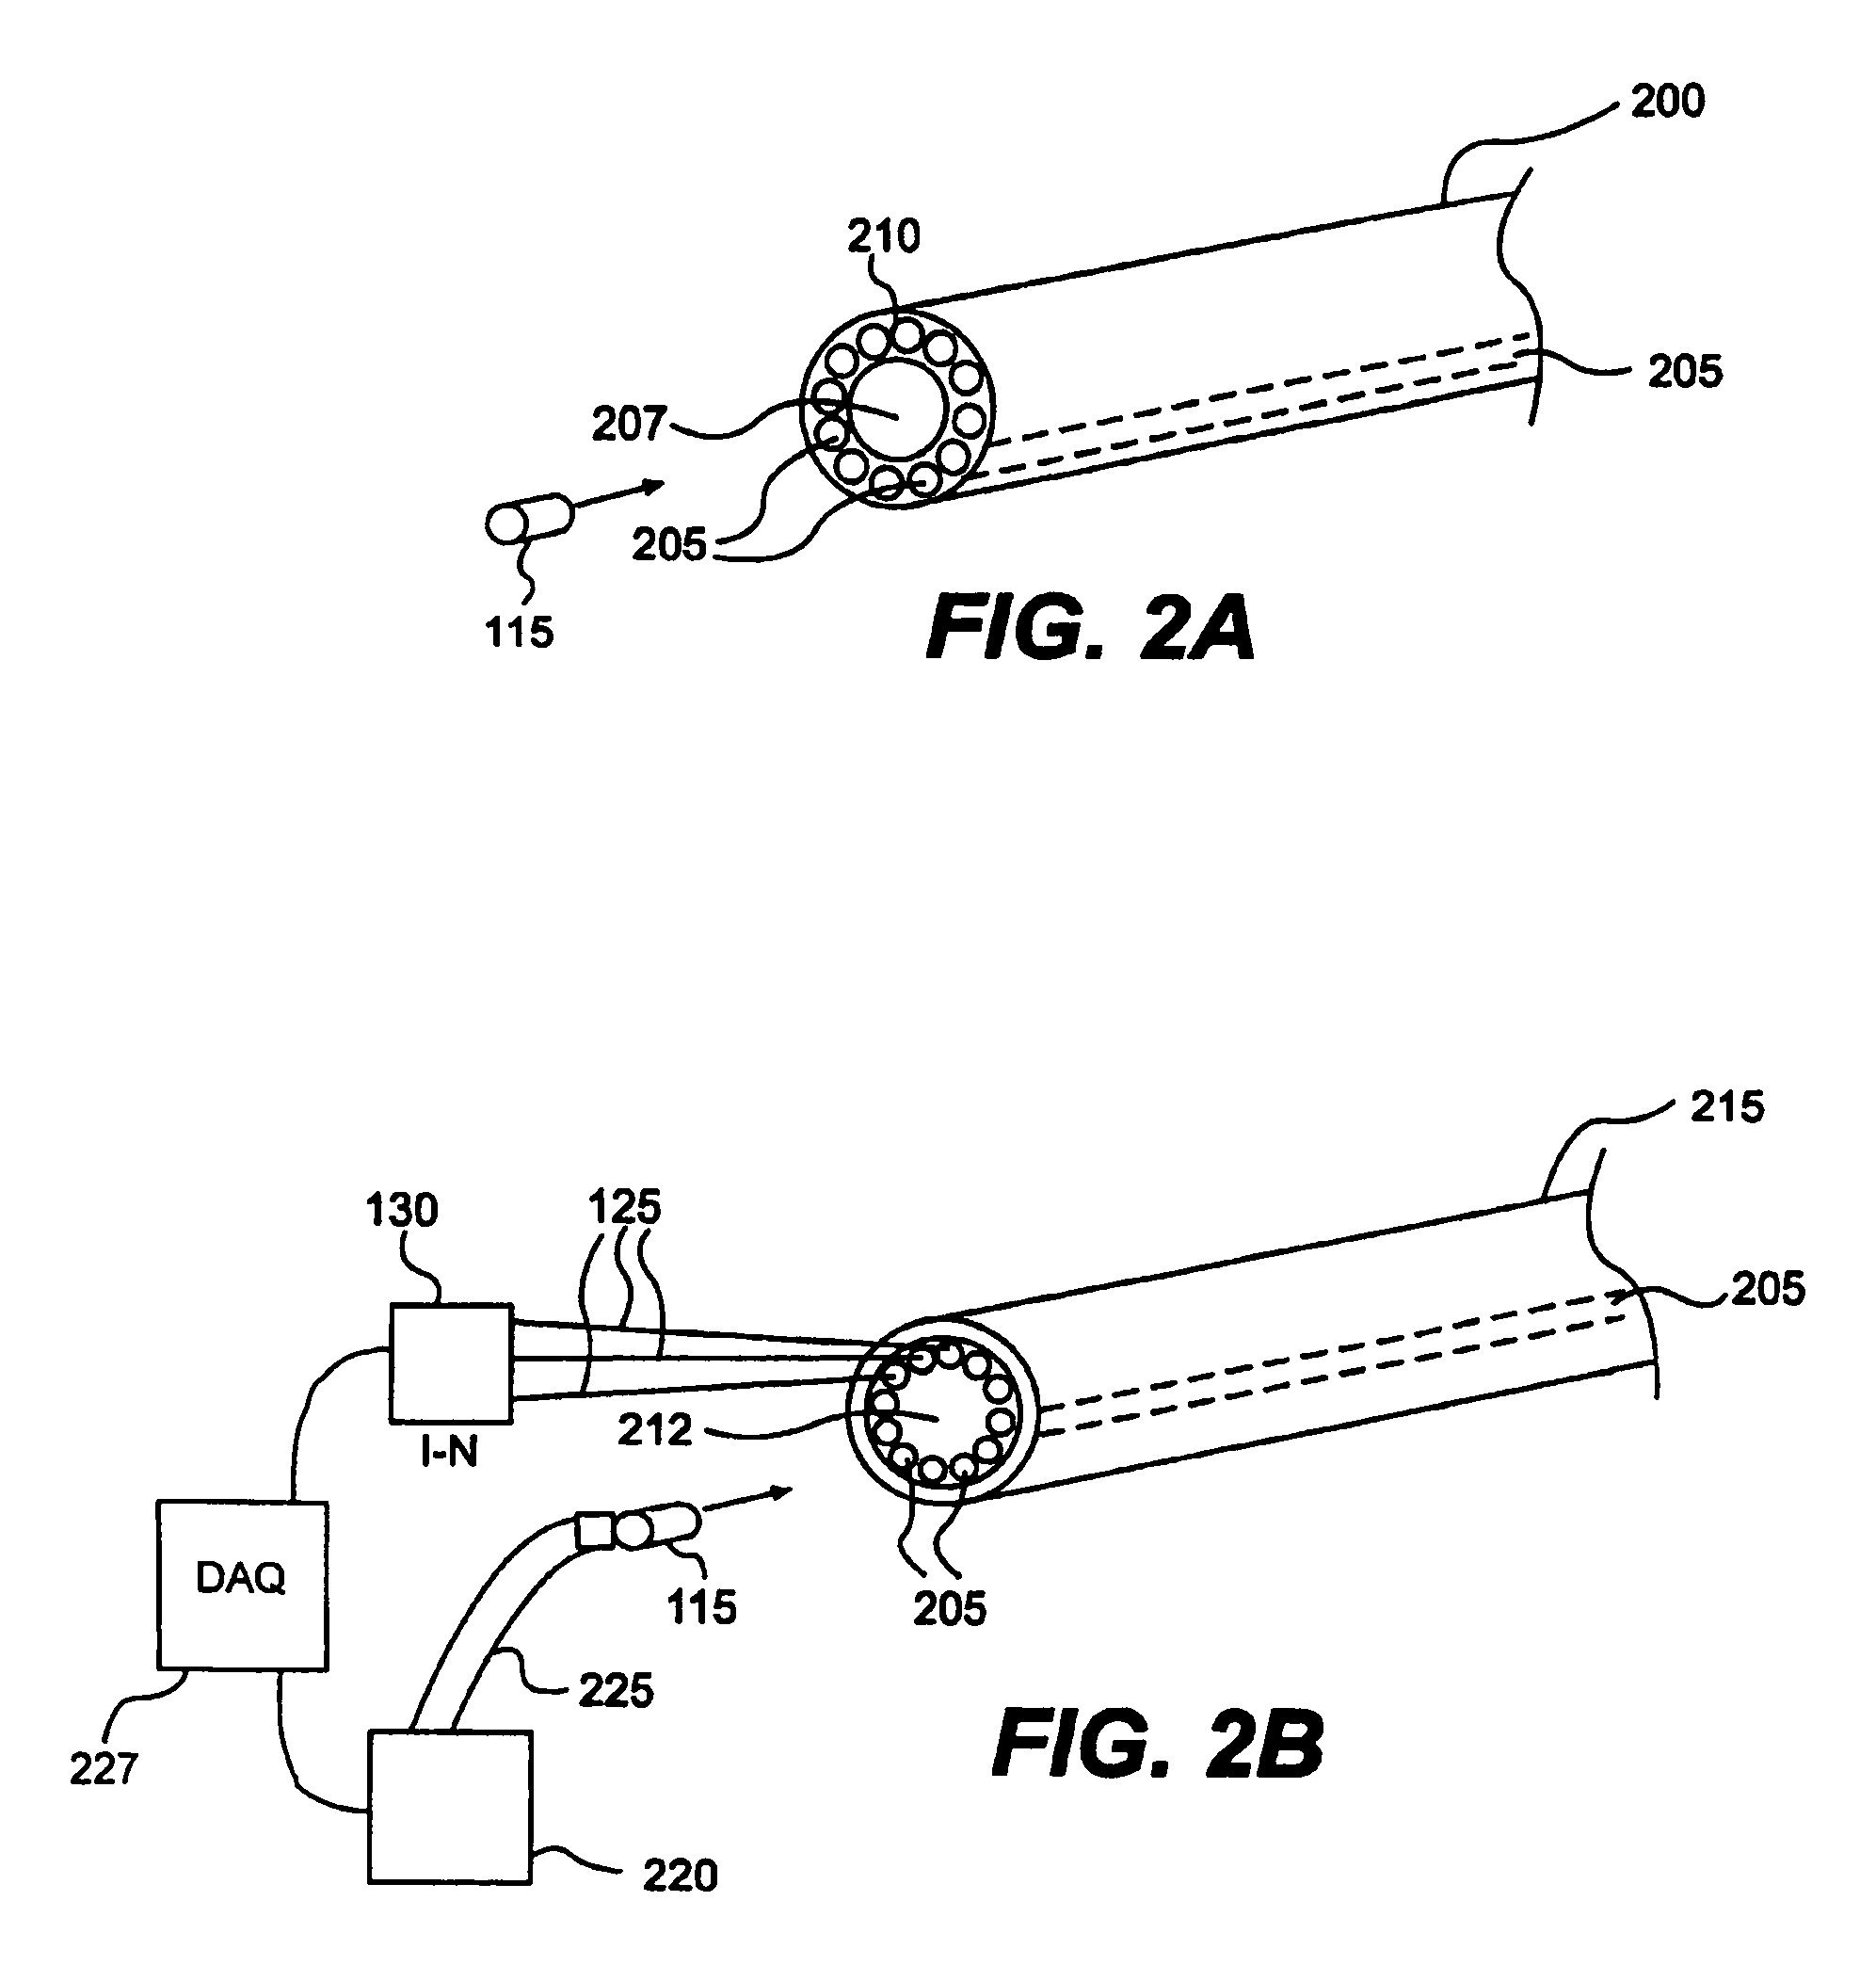 Apparatus and method for brachytherapy radiation distribution mapping